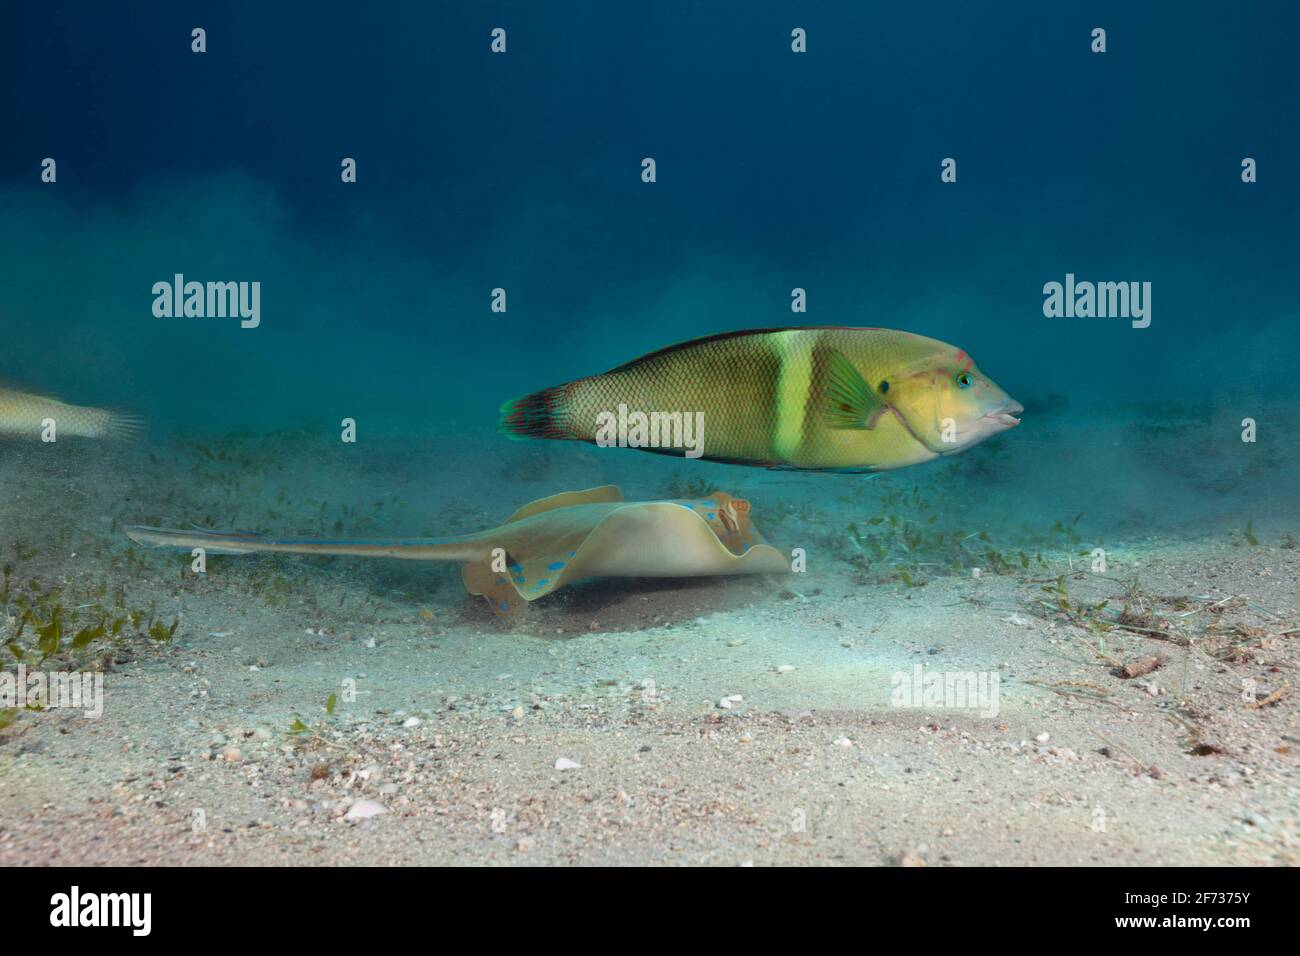 Bluespotted ribbontail ray (Taeniura lymma) and mirror-spotted junker, Marsa Alam, Red Sea, Egypt Stock Photo